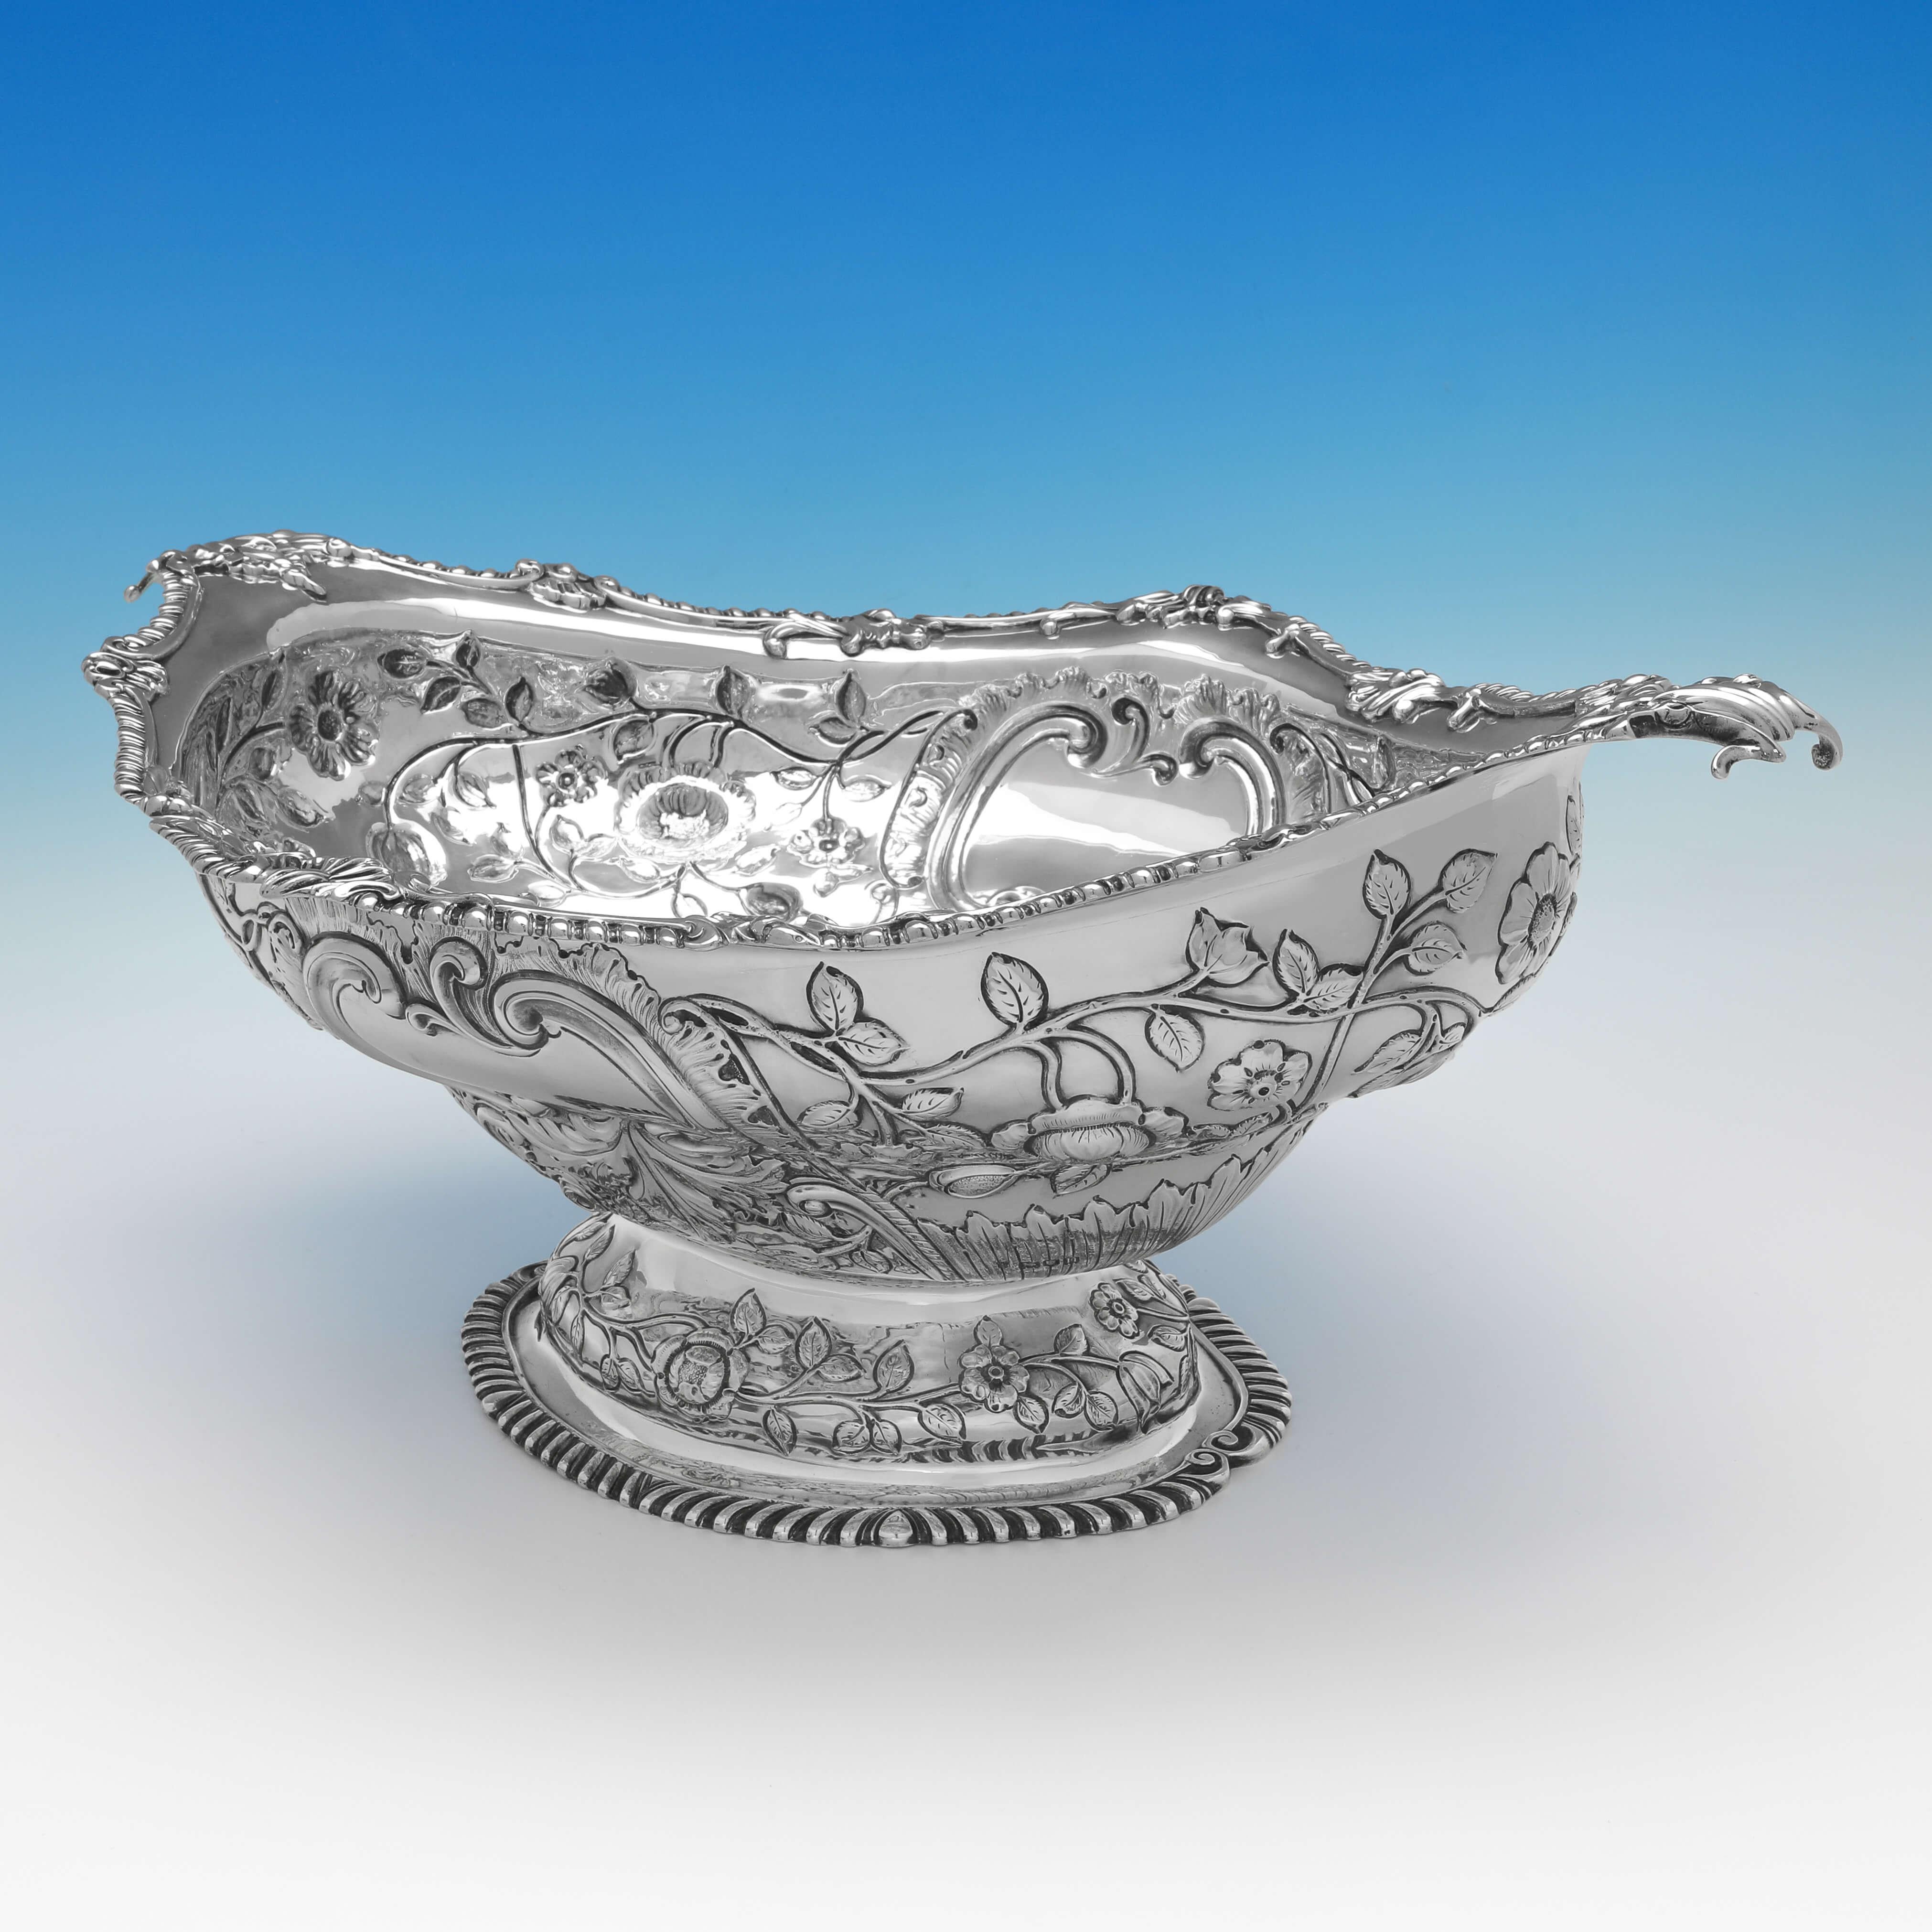 Hallmarked in London in 1908 by Charles Stuart Harris, this stunning and large, Edwardian, Antique Sterling Silver Centrepiece, is oval in shape, and features ornate chased decoration to the body and foot, and shaped gadroon borders. 

The dish